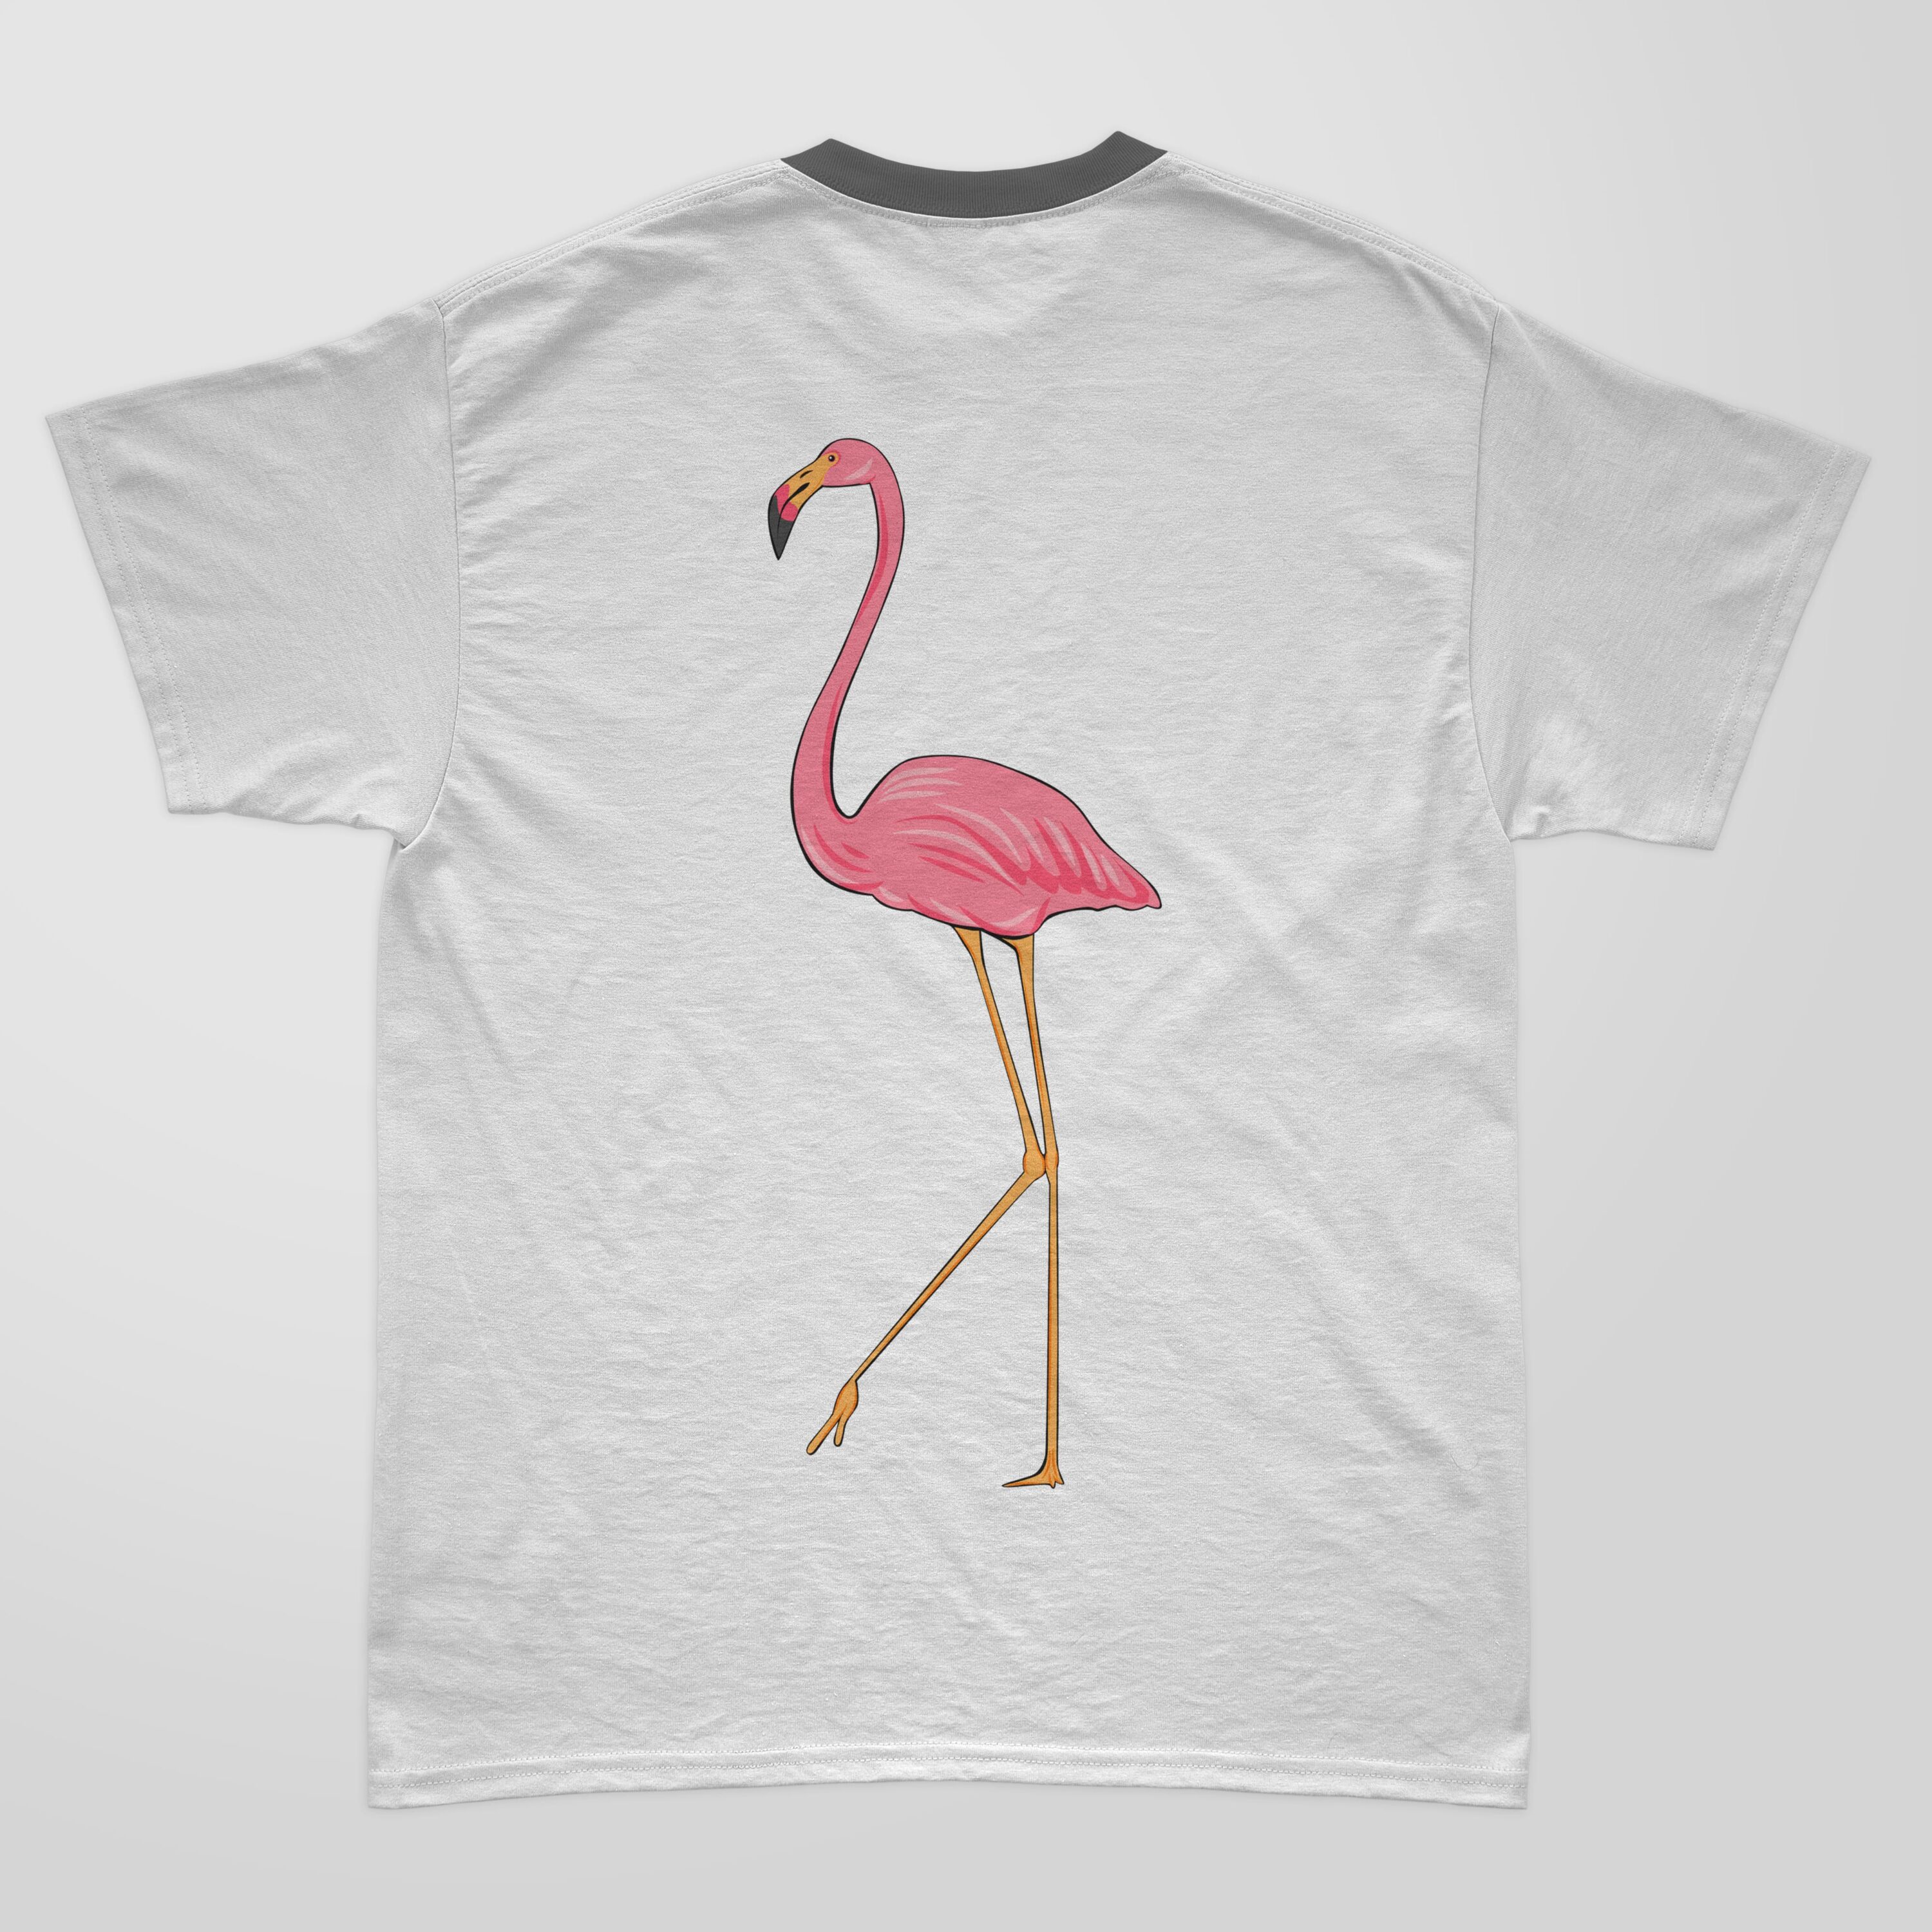 Straight pink flamingo on the white fabric.